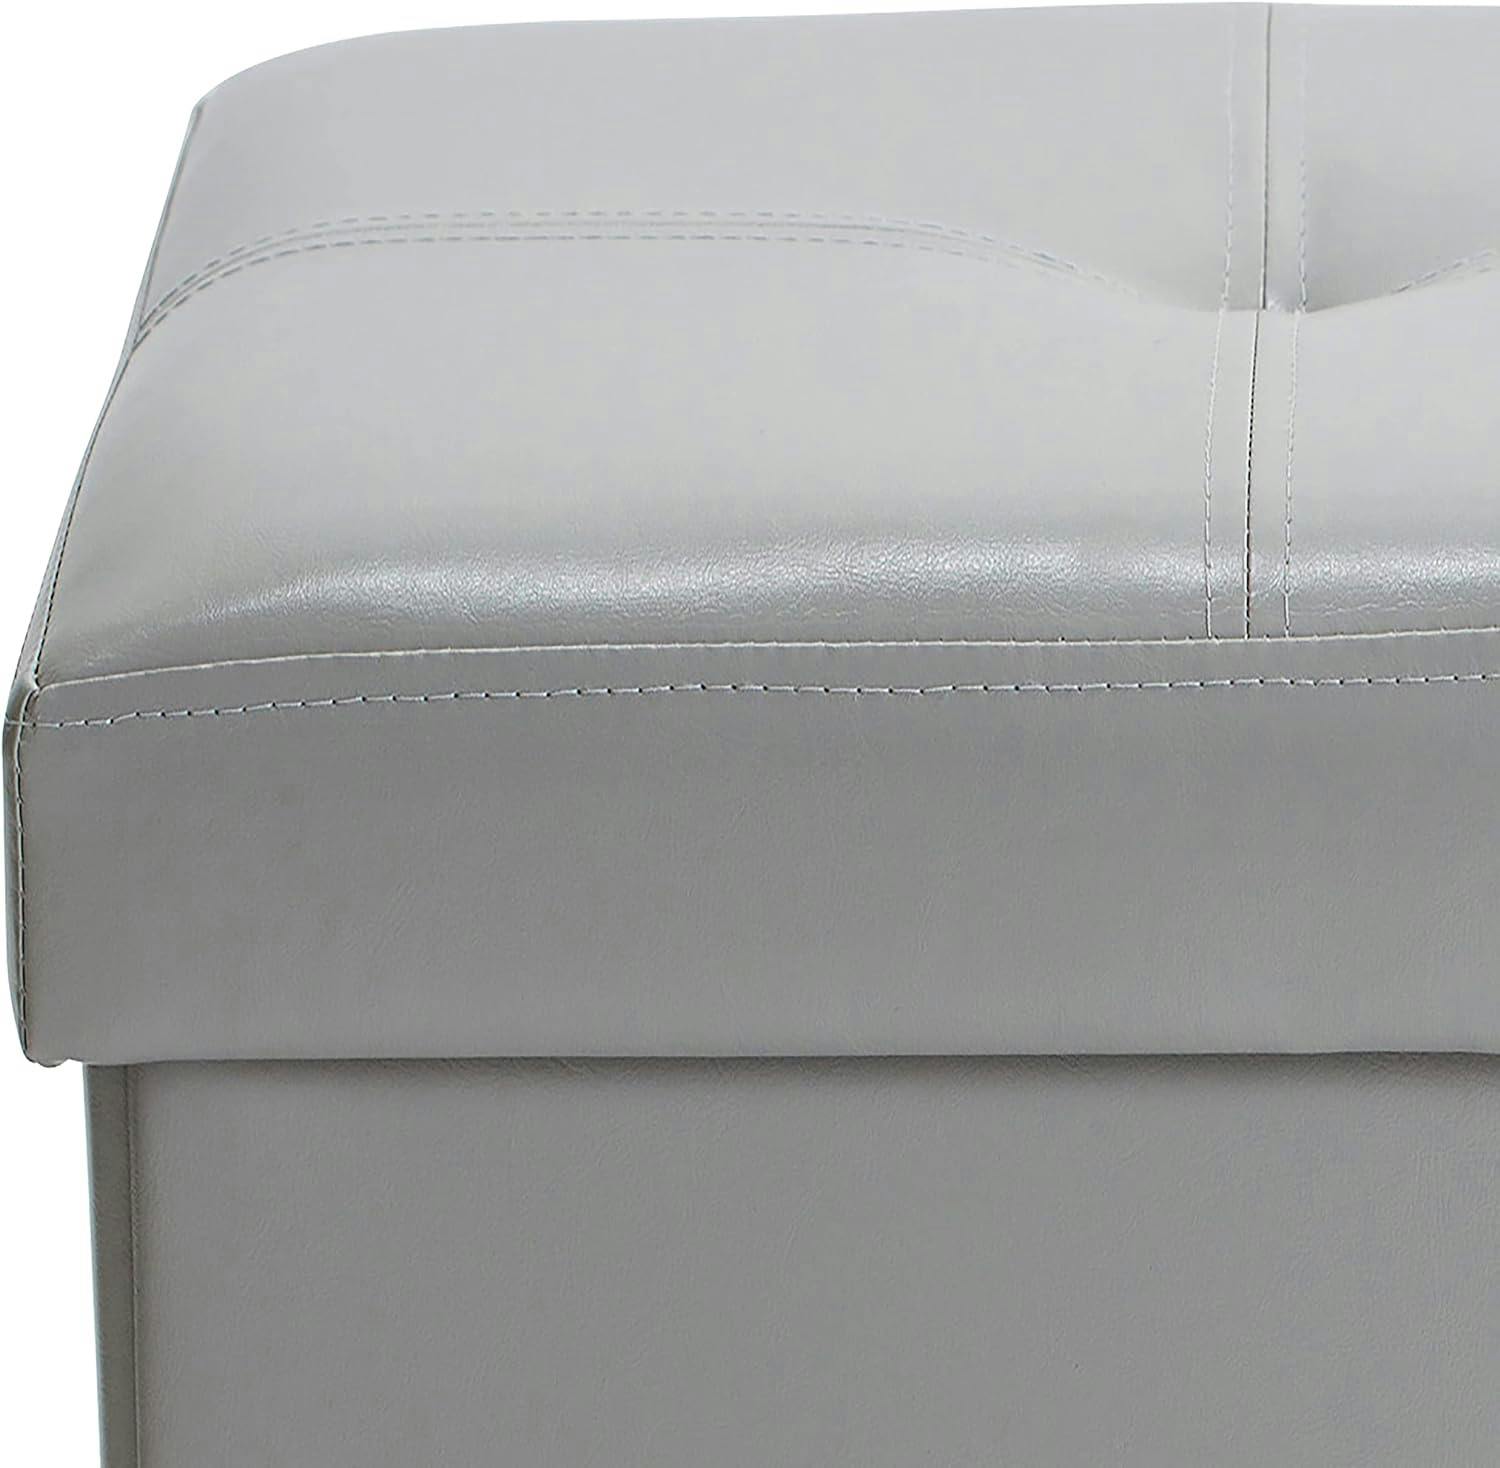 Classic Gray Faux Leather Folding Storage Ottoman Bench